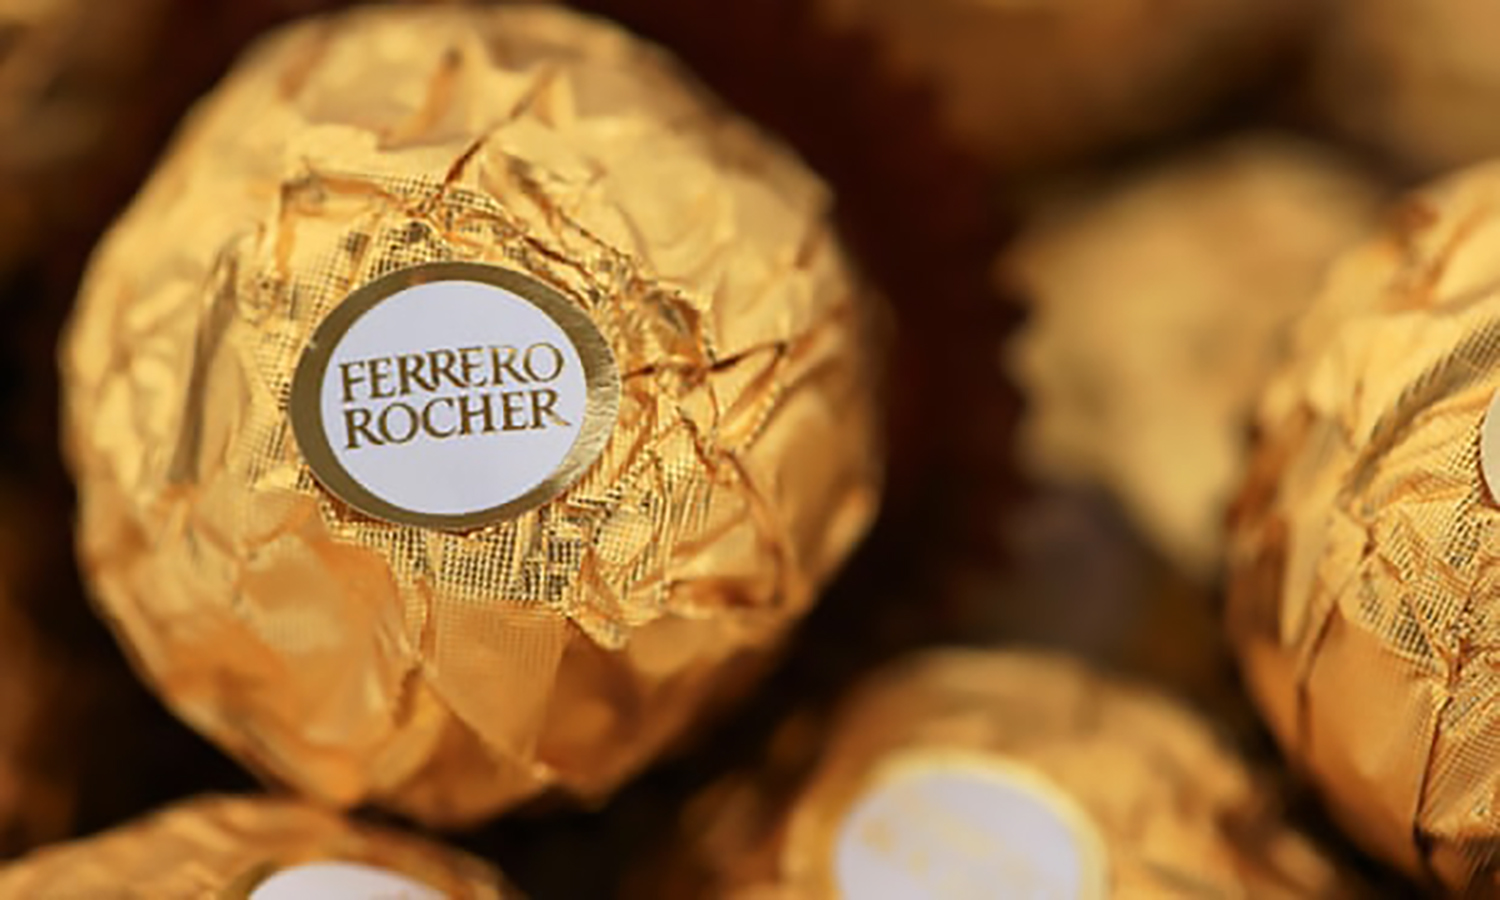 Ferrero Rocher chocolates may be tainted by child labour